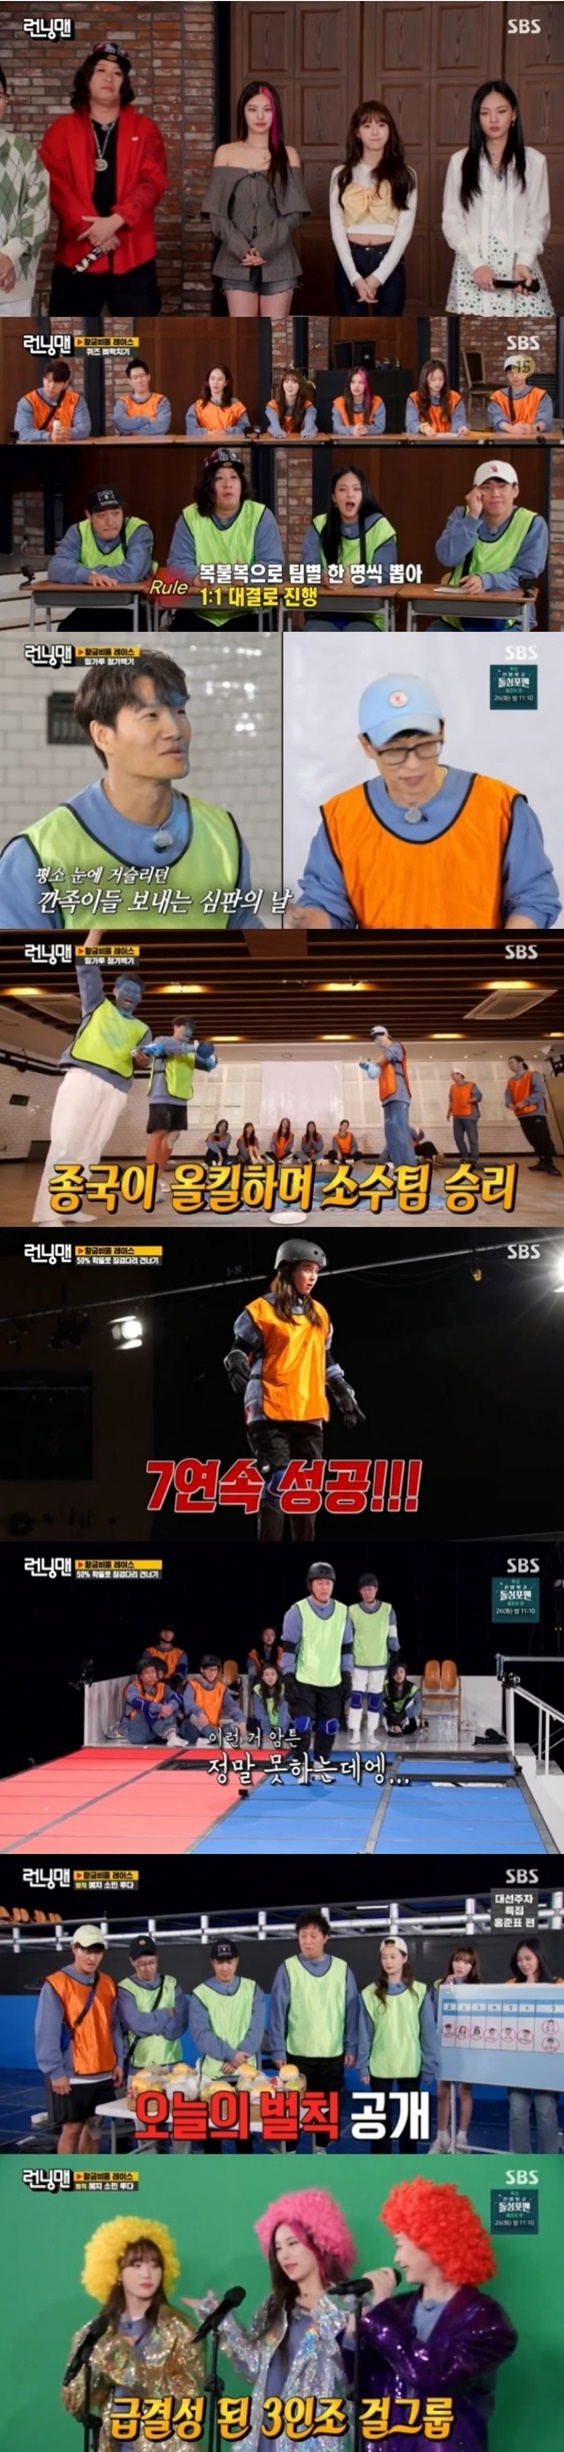 Running Man, which aired on the last 24 Days, ranked first in entertainment in the same time zone with an average audience rating of 5.9% (hereinafter based on Nielsen Korea Seoul Capital Area, household), and the highest audience rating per minute jumped to 10.3%.The 2049 ratings, the main indicator and target indicator of advertisers, also ranked first in the same time zone with 3.2% (hereinafter based on Nielsen Korea Seoul Capital Area).The broadcast was decorated with Golden Ratio Race, and guest Min-ji, singer Bibi, ITZY Yezi and space girl Luda, who represent the MZ generation, joined together.Golden Ratio Race was a quiz showdown with a captain giving a number while conducting a round keyword mission, and PD decided to draw a number to decide the team.Kim Jong-kook became the captain, while Yang Se-chan, Haha, MC Min-ji and Bibi became a minority team of empties.However, the quiz showdown was unexpected and a minority team won.The second race was teamed with Kim Jong-kook, with Ji Suk-jin being selected as the captain and PD picking up two.The somewhere sick white flag confrontation was held and the appearance of the absolute strongman Kim Jong-kook made many teams fearful.This game, which had to be punched by MCs command with flour buried, was a game in favor of Kim Jong-kook, who was ahead of power, and Kim Jong-kook and Min-jis confrontation gave a big smile.The final race had to cross the stepping stones only with a tentacle; members complained of fear in the extreme situation where they had to Choices the broken styrofoam and hard wooden-plate legs at 1/2 odds.The King of the Bold Song Ji-hyo was also nervous, but overcame a huge odds fight and Choices seven straight wooden legs.Yang Se-chan stepped up after the same team Bibi was eliminated immediately.Yang Se-chan laughed at his smile, saying, I will go to the bean in Gangshi mode. He laughed and laughed at his knife, which he did not think.The scene took the best one minute with a top audience rating of 10.3% per minute.Thanks to Song Ji-hyos performance, Kim Jong-kooks team easily crossed the bridge, and opponents Ji Suk-jin, Min-ji, Luda, Jeon So-min, Haha and Yezi did not advance more than a step.The final result was Kim Jong-kook first, Song Ji-hyo second, and Jeon So-min, Luda and Yezi received penalties.